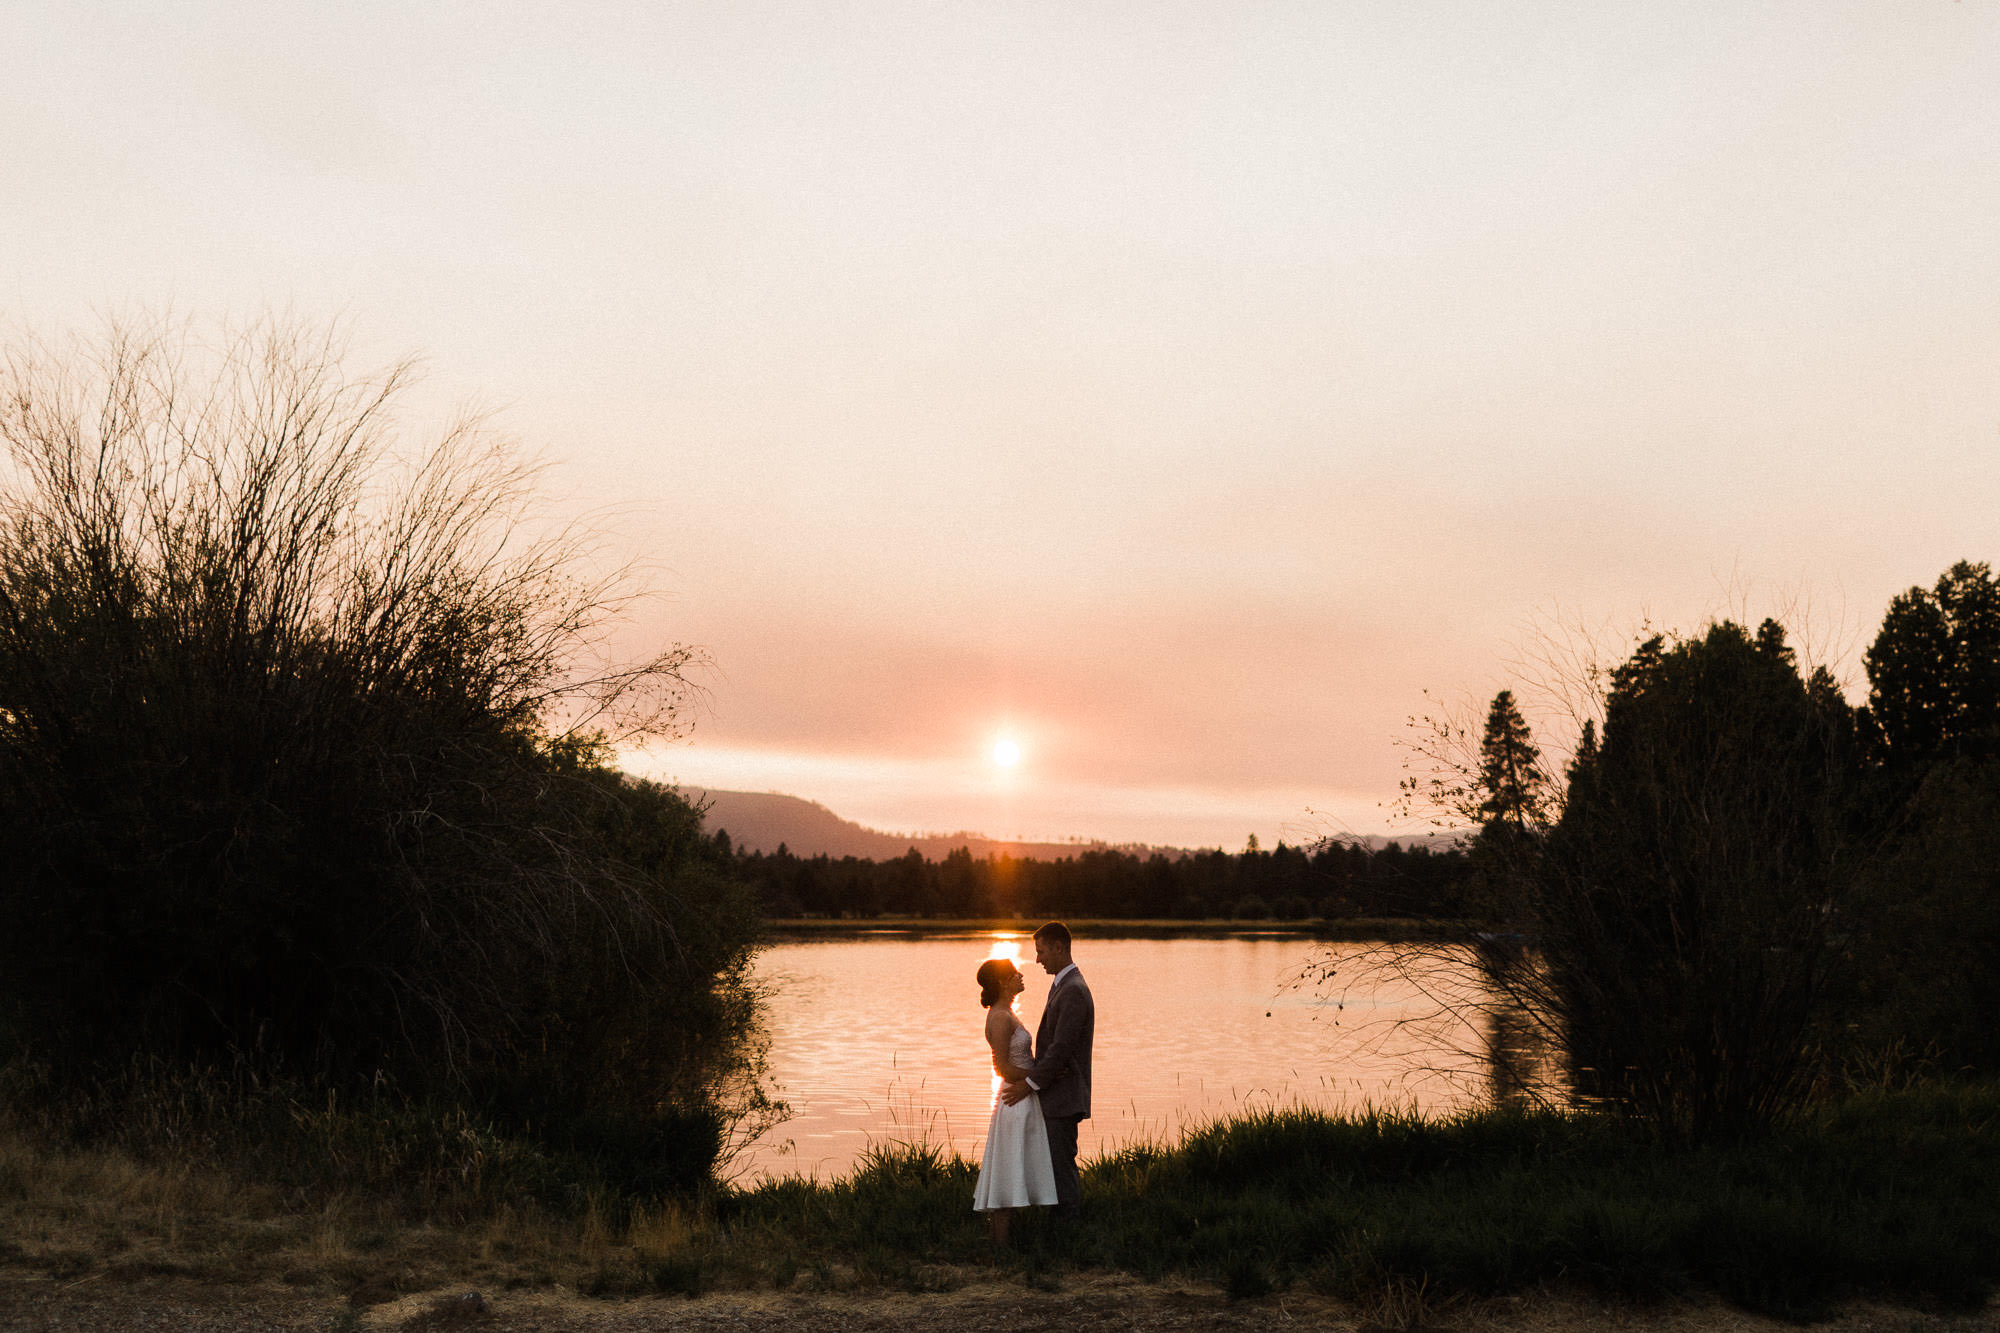 A bride and groom embrace in front of a pond at sunset at Black Butte Ranch